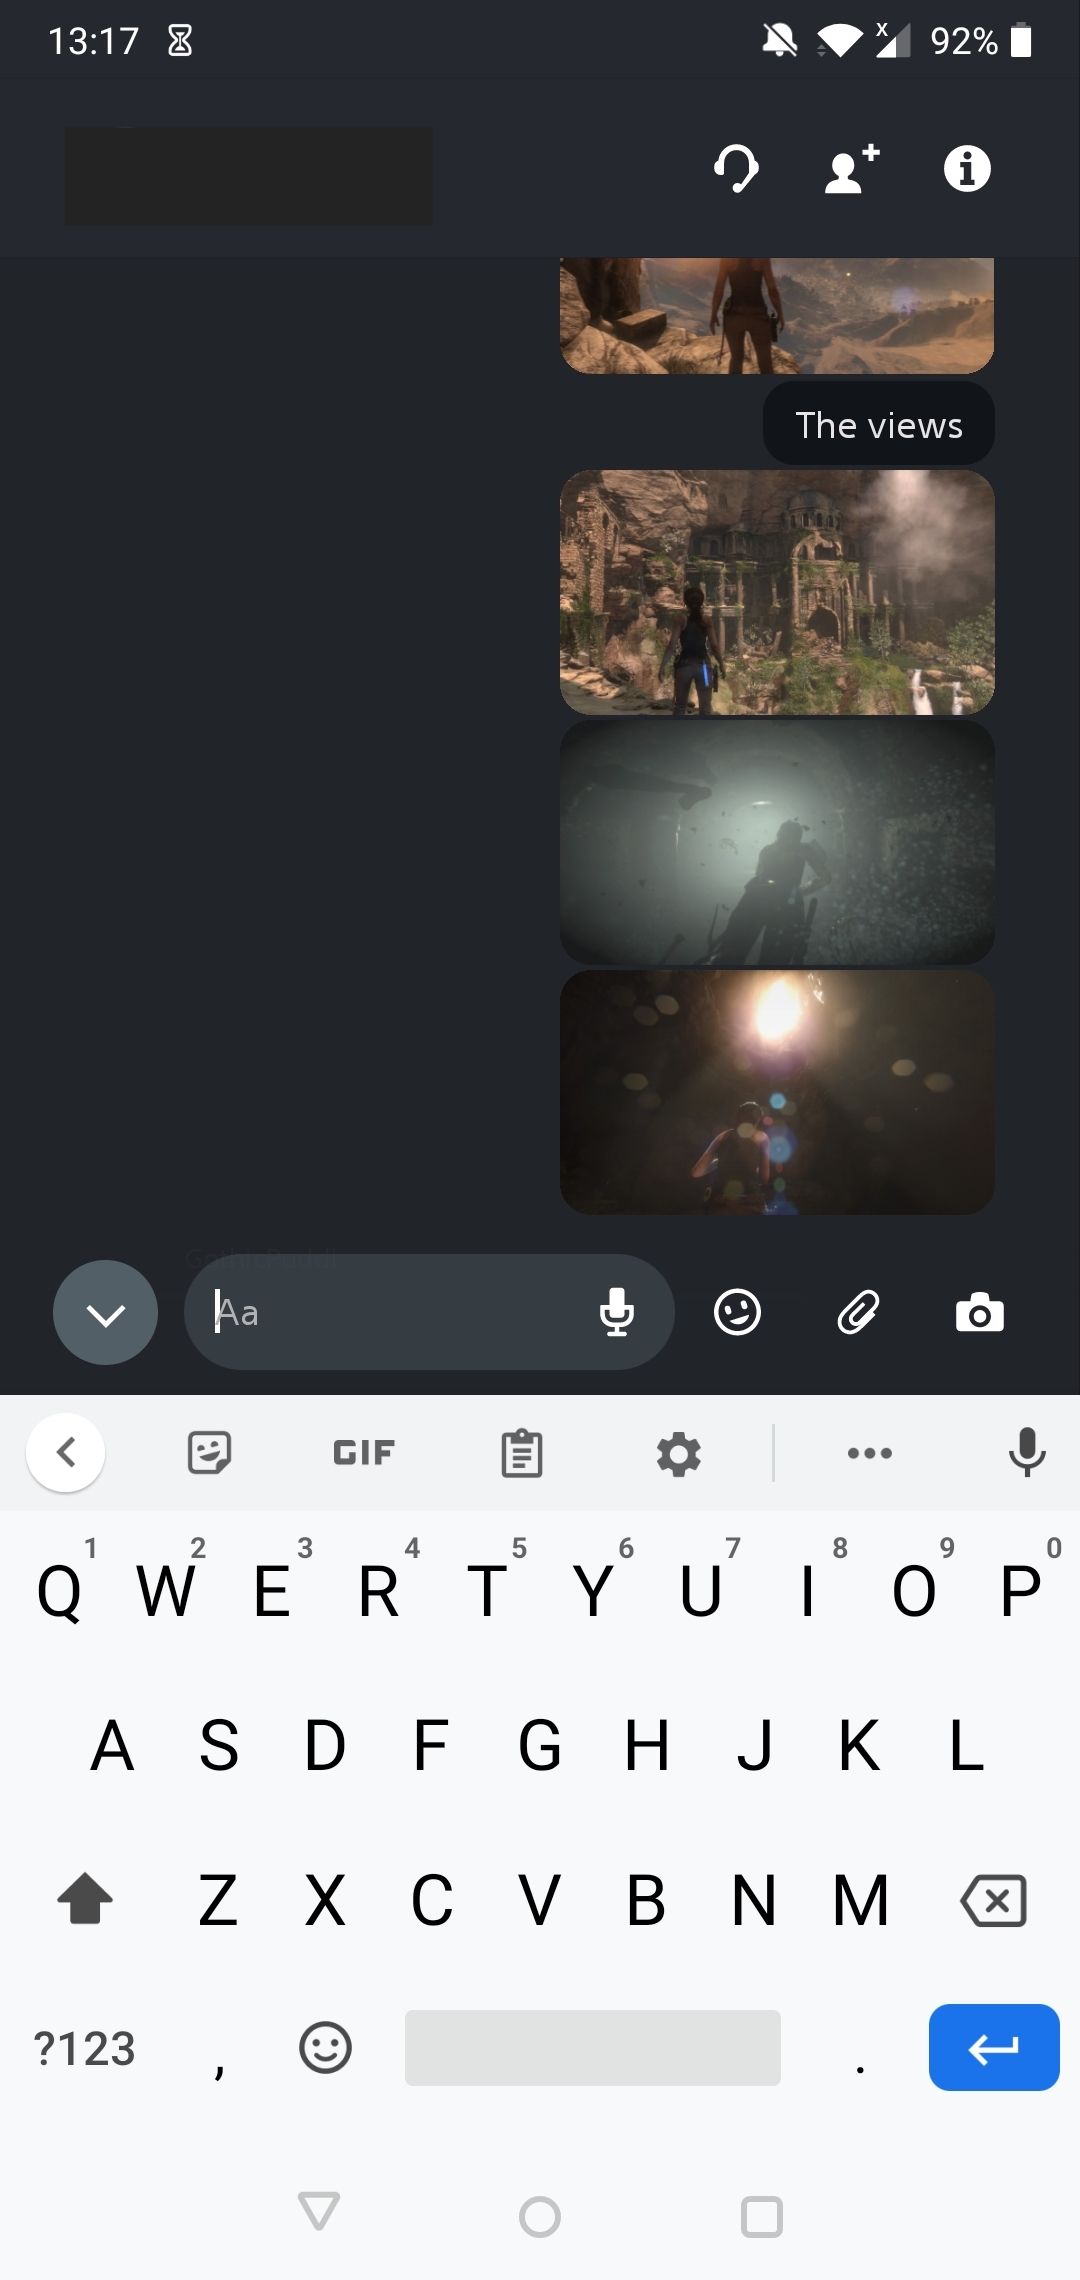 A chat thread with the keyboard up on the PS app for Android.